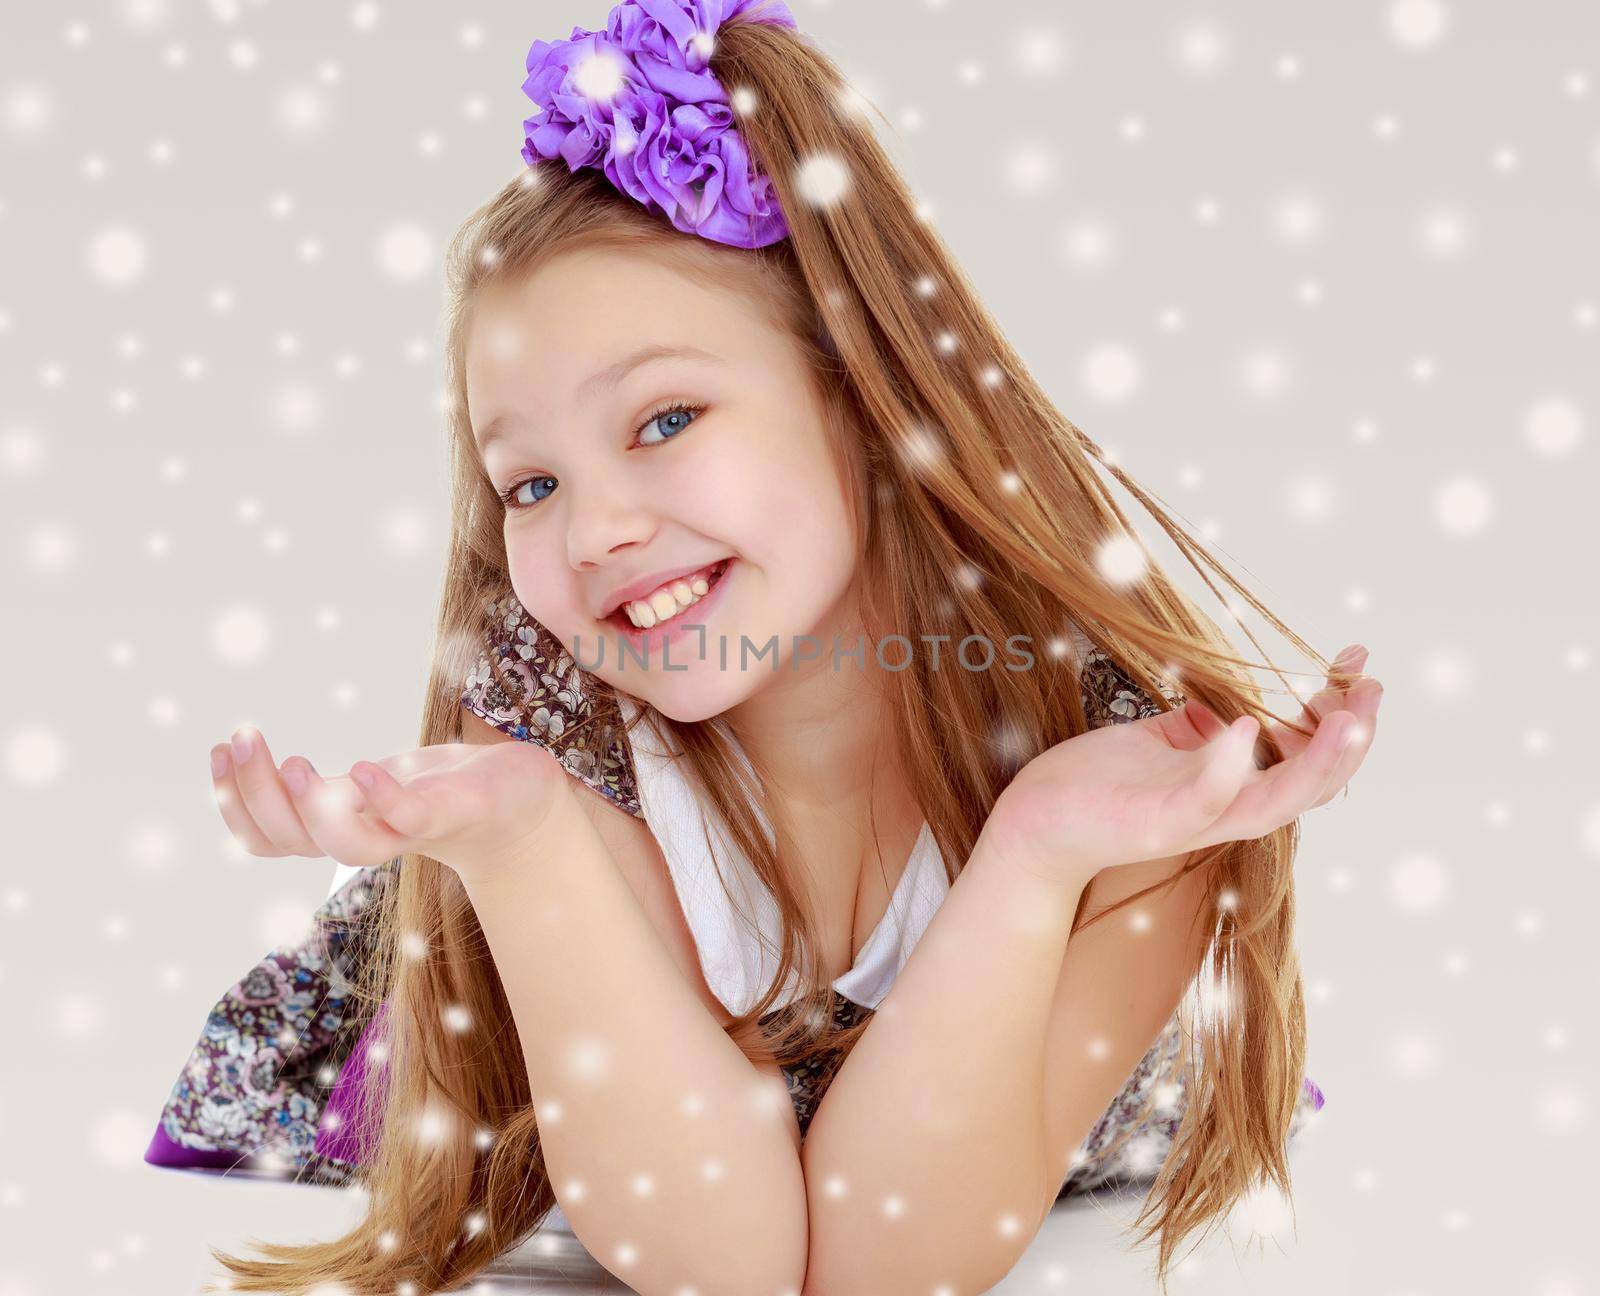 Happy little girl with a big purple bow on her head lying on the floor. Girl throws hands and smiling sweetly at the camera.On the Christmas background with white snowflakes.